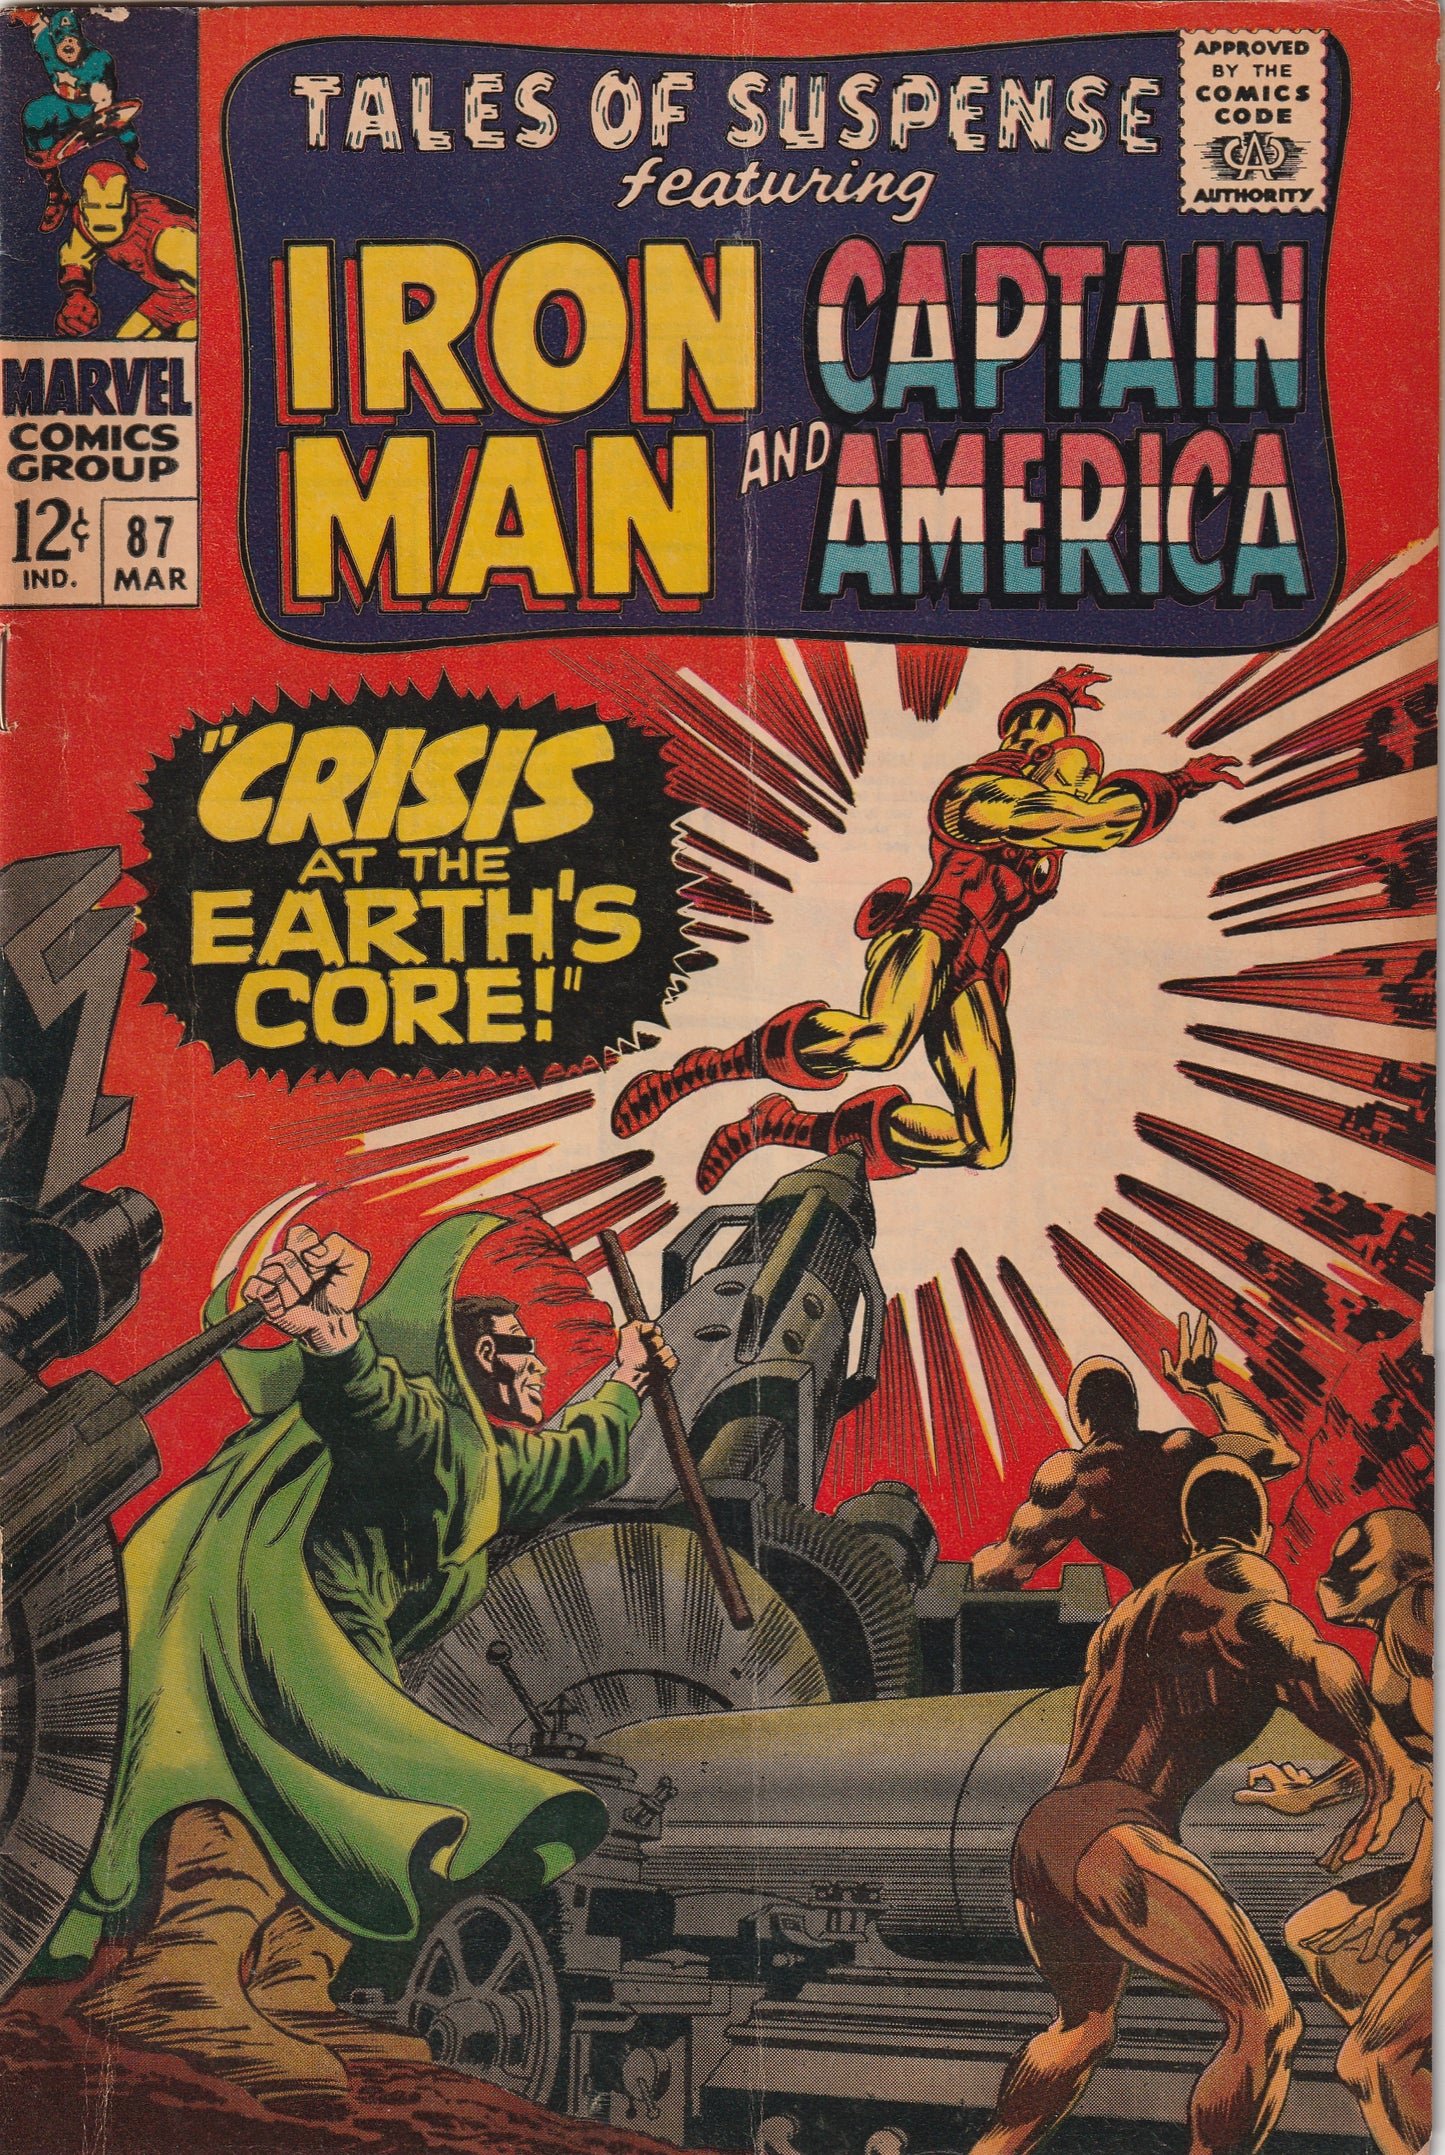 Tales of Suspense #87 (1967) - Featuring Iron Man and Captain America